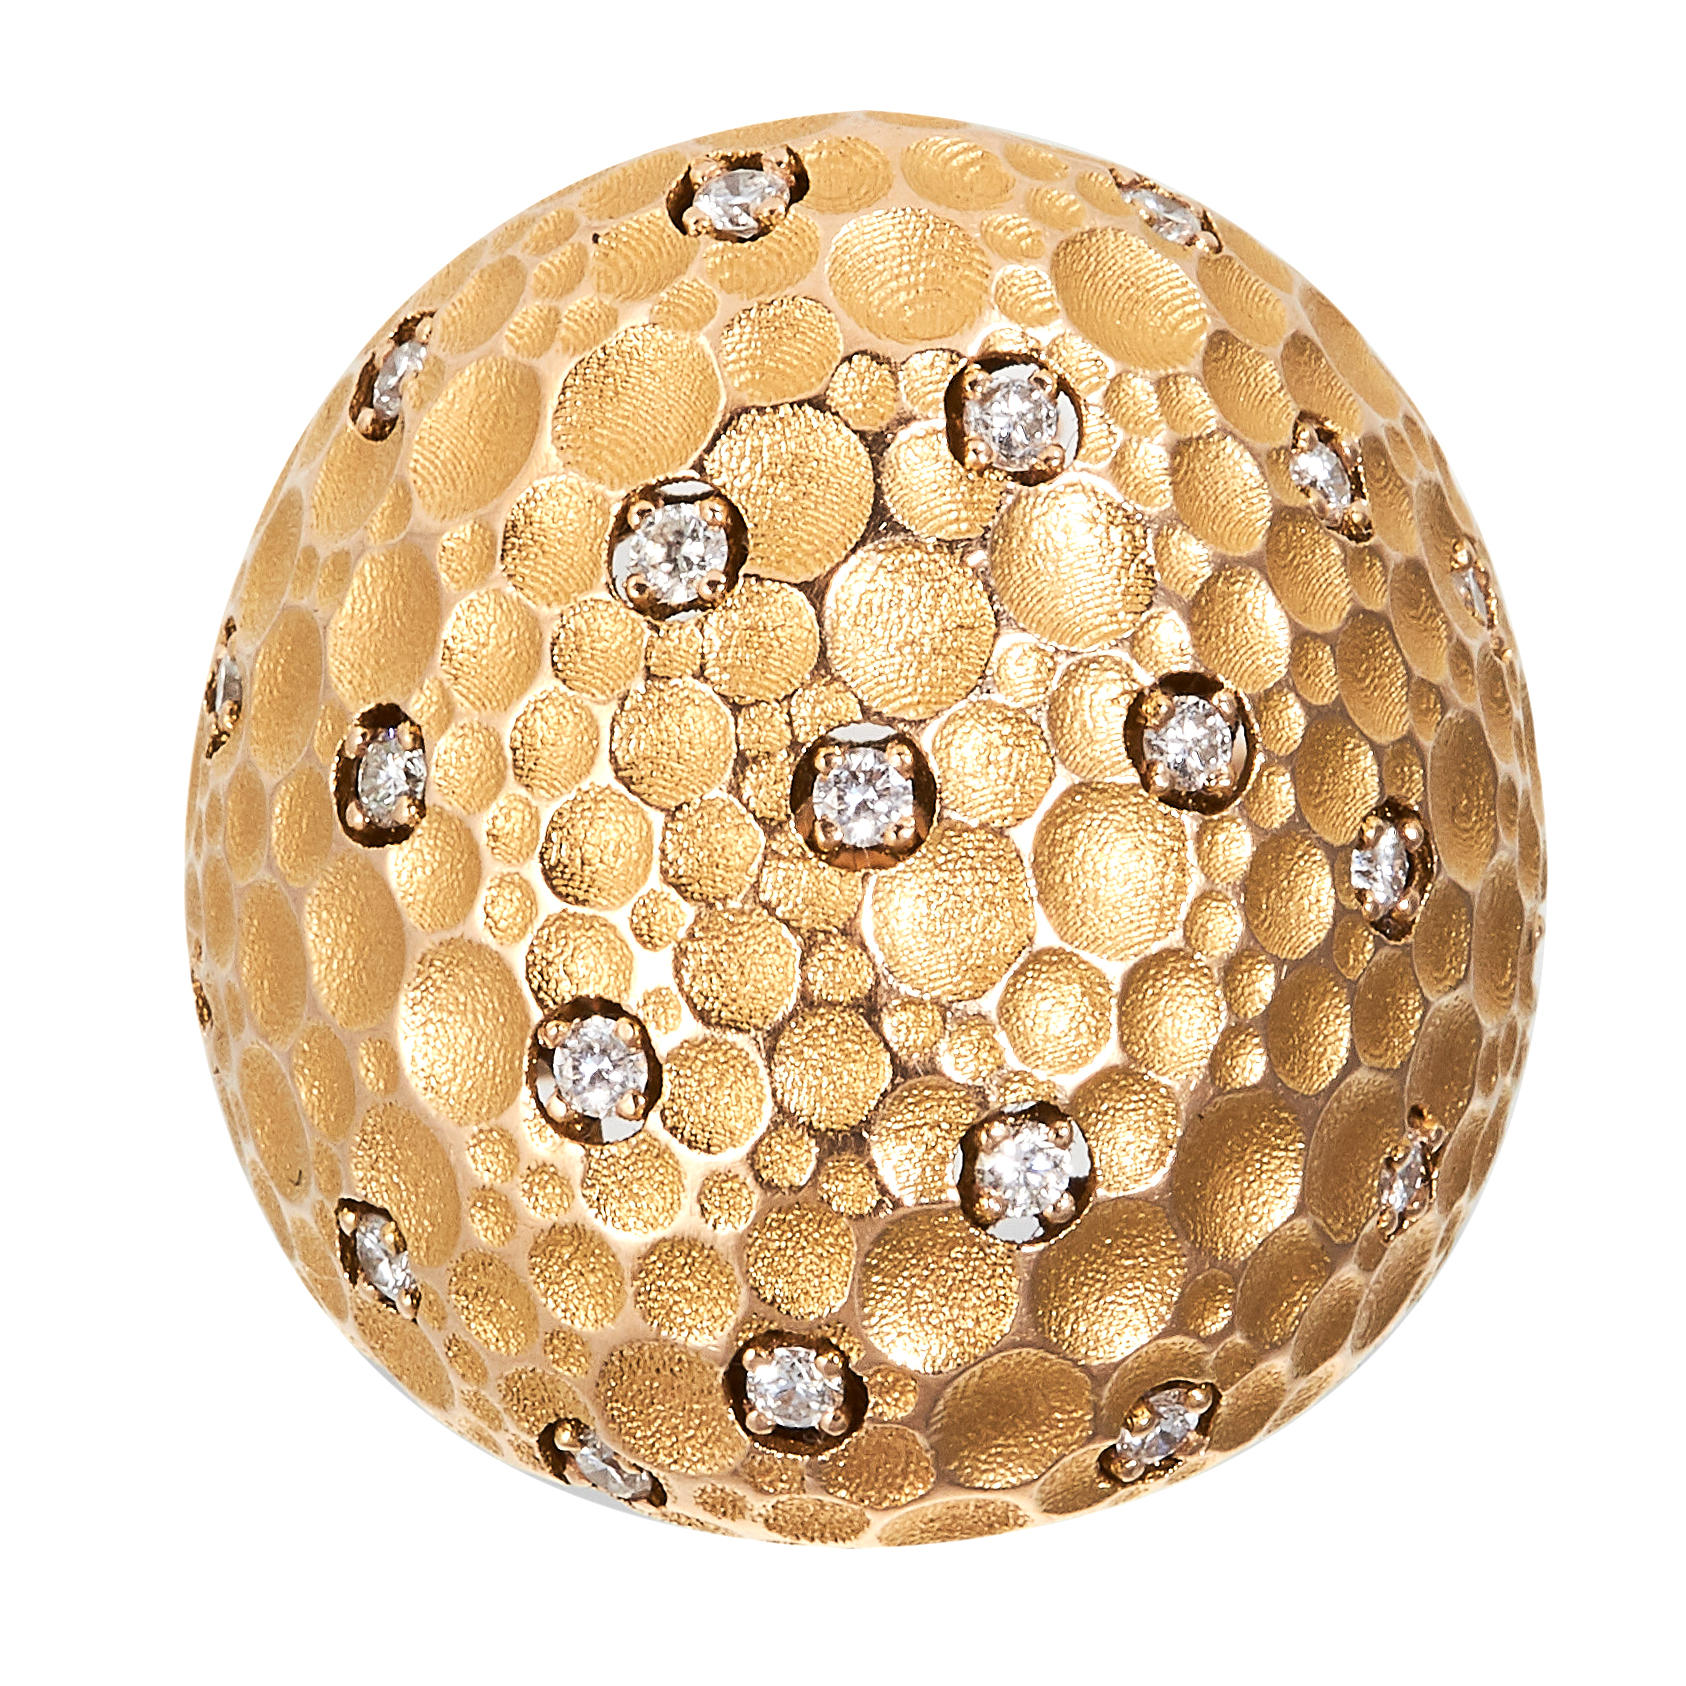 A DIAMOND BOMBE RING in 18ct yellow gold, comprising of a textured design jewelled with twenty one